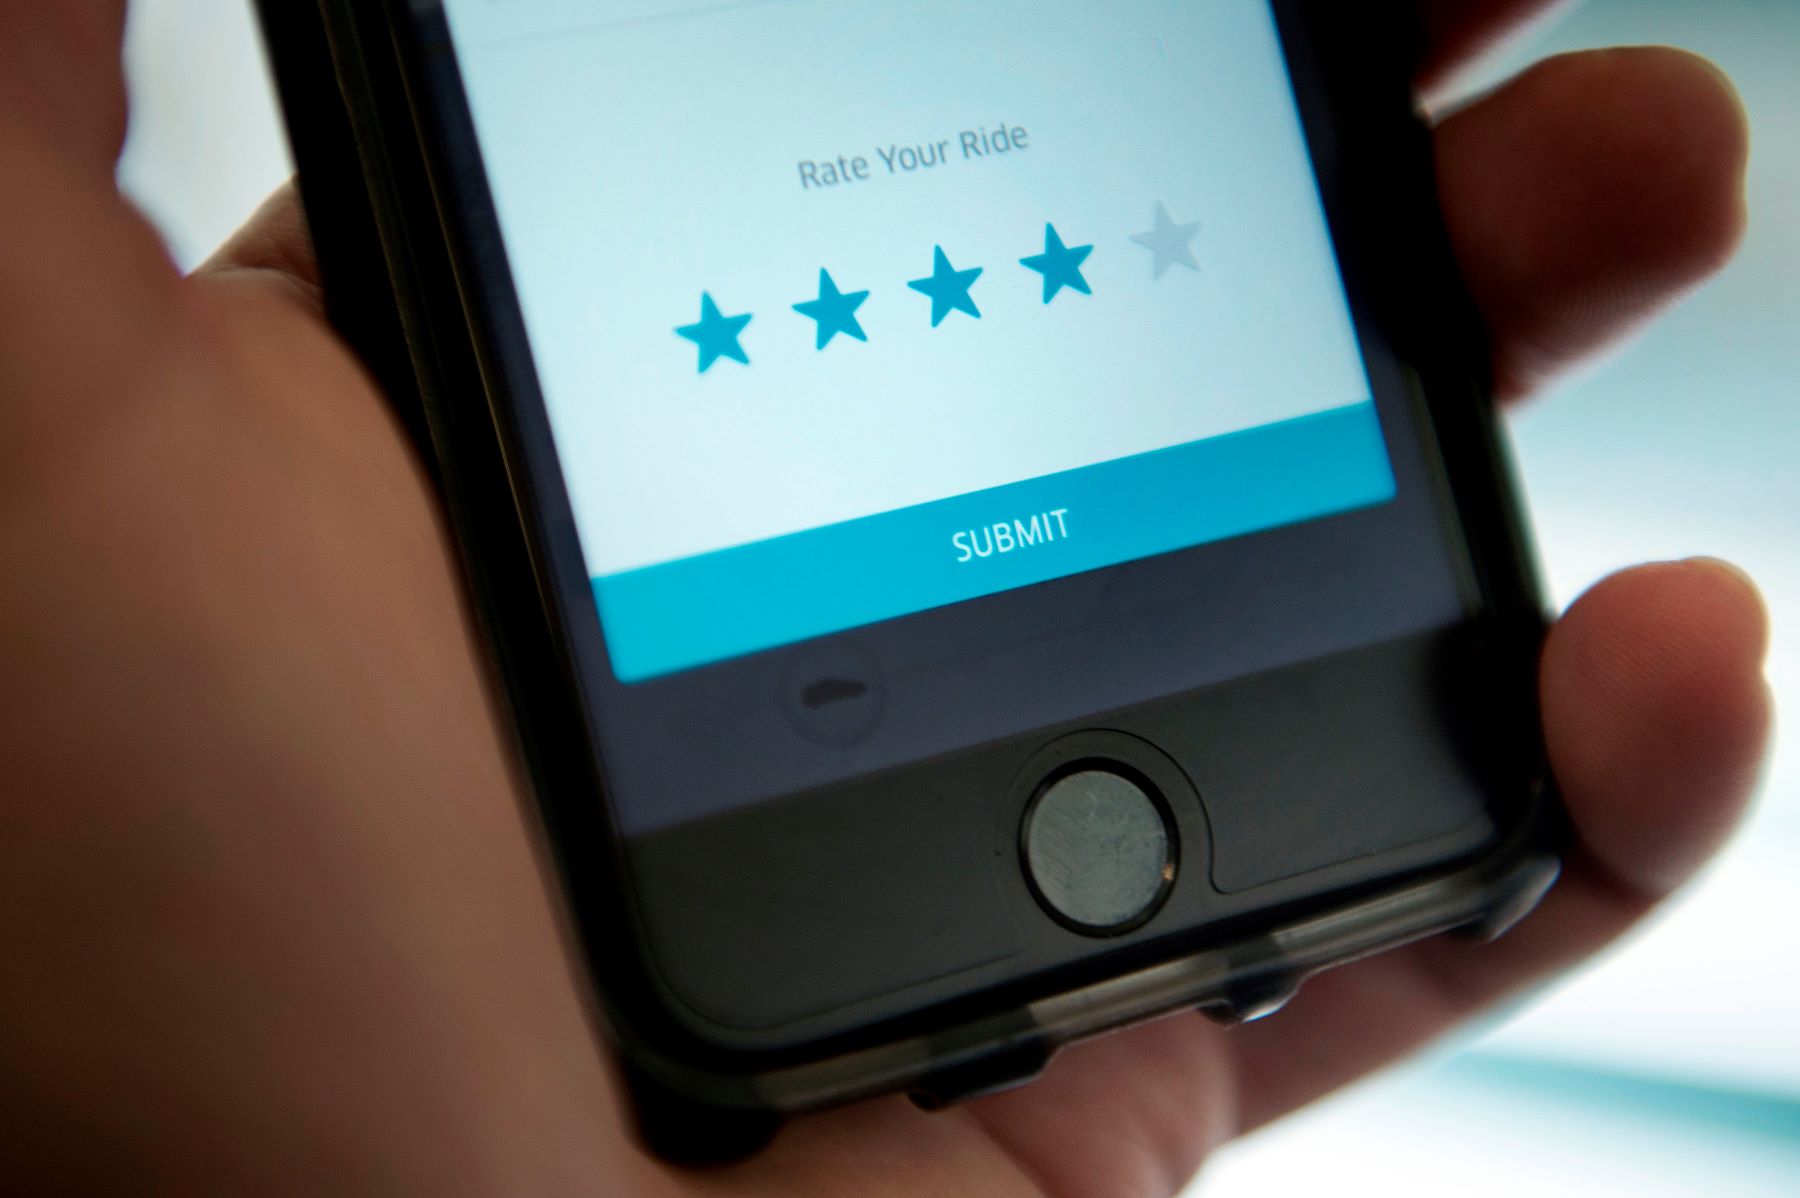 Leaving a car review for a ride-share app